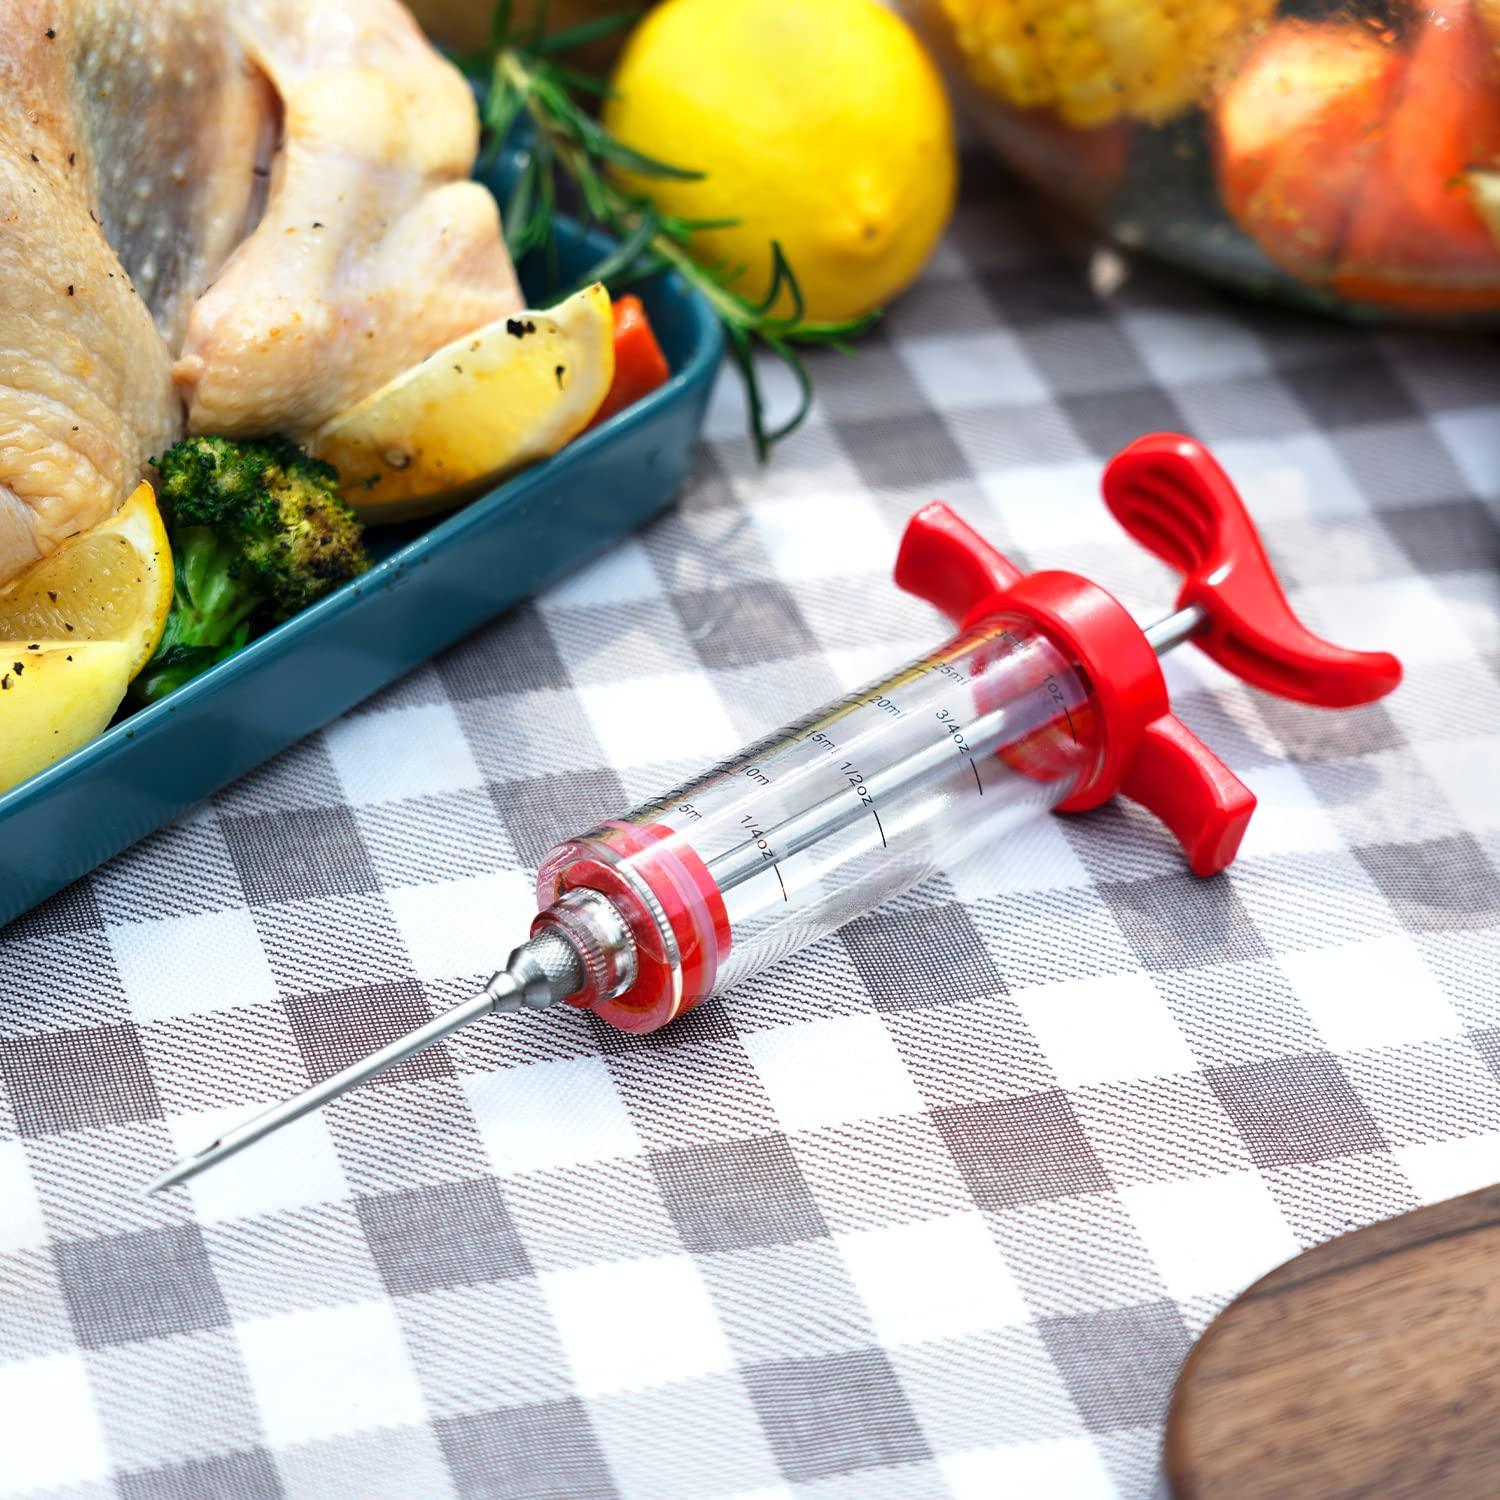 Meat Injector, Plastic Marinade Turkey Injector with 1-oz Capacity 2pcs stainless steel needles by DIMESHY - CookCave